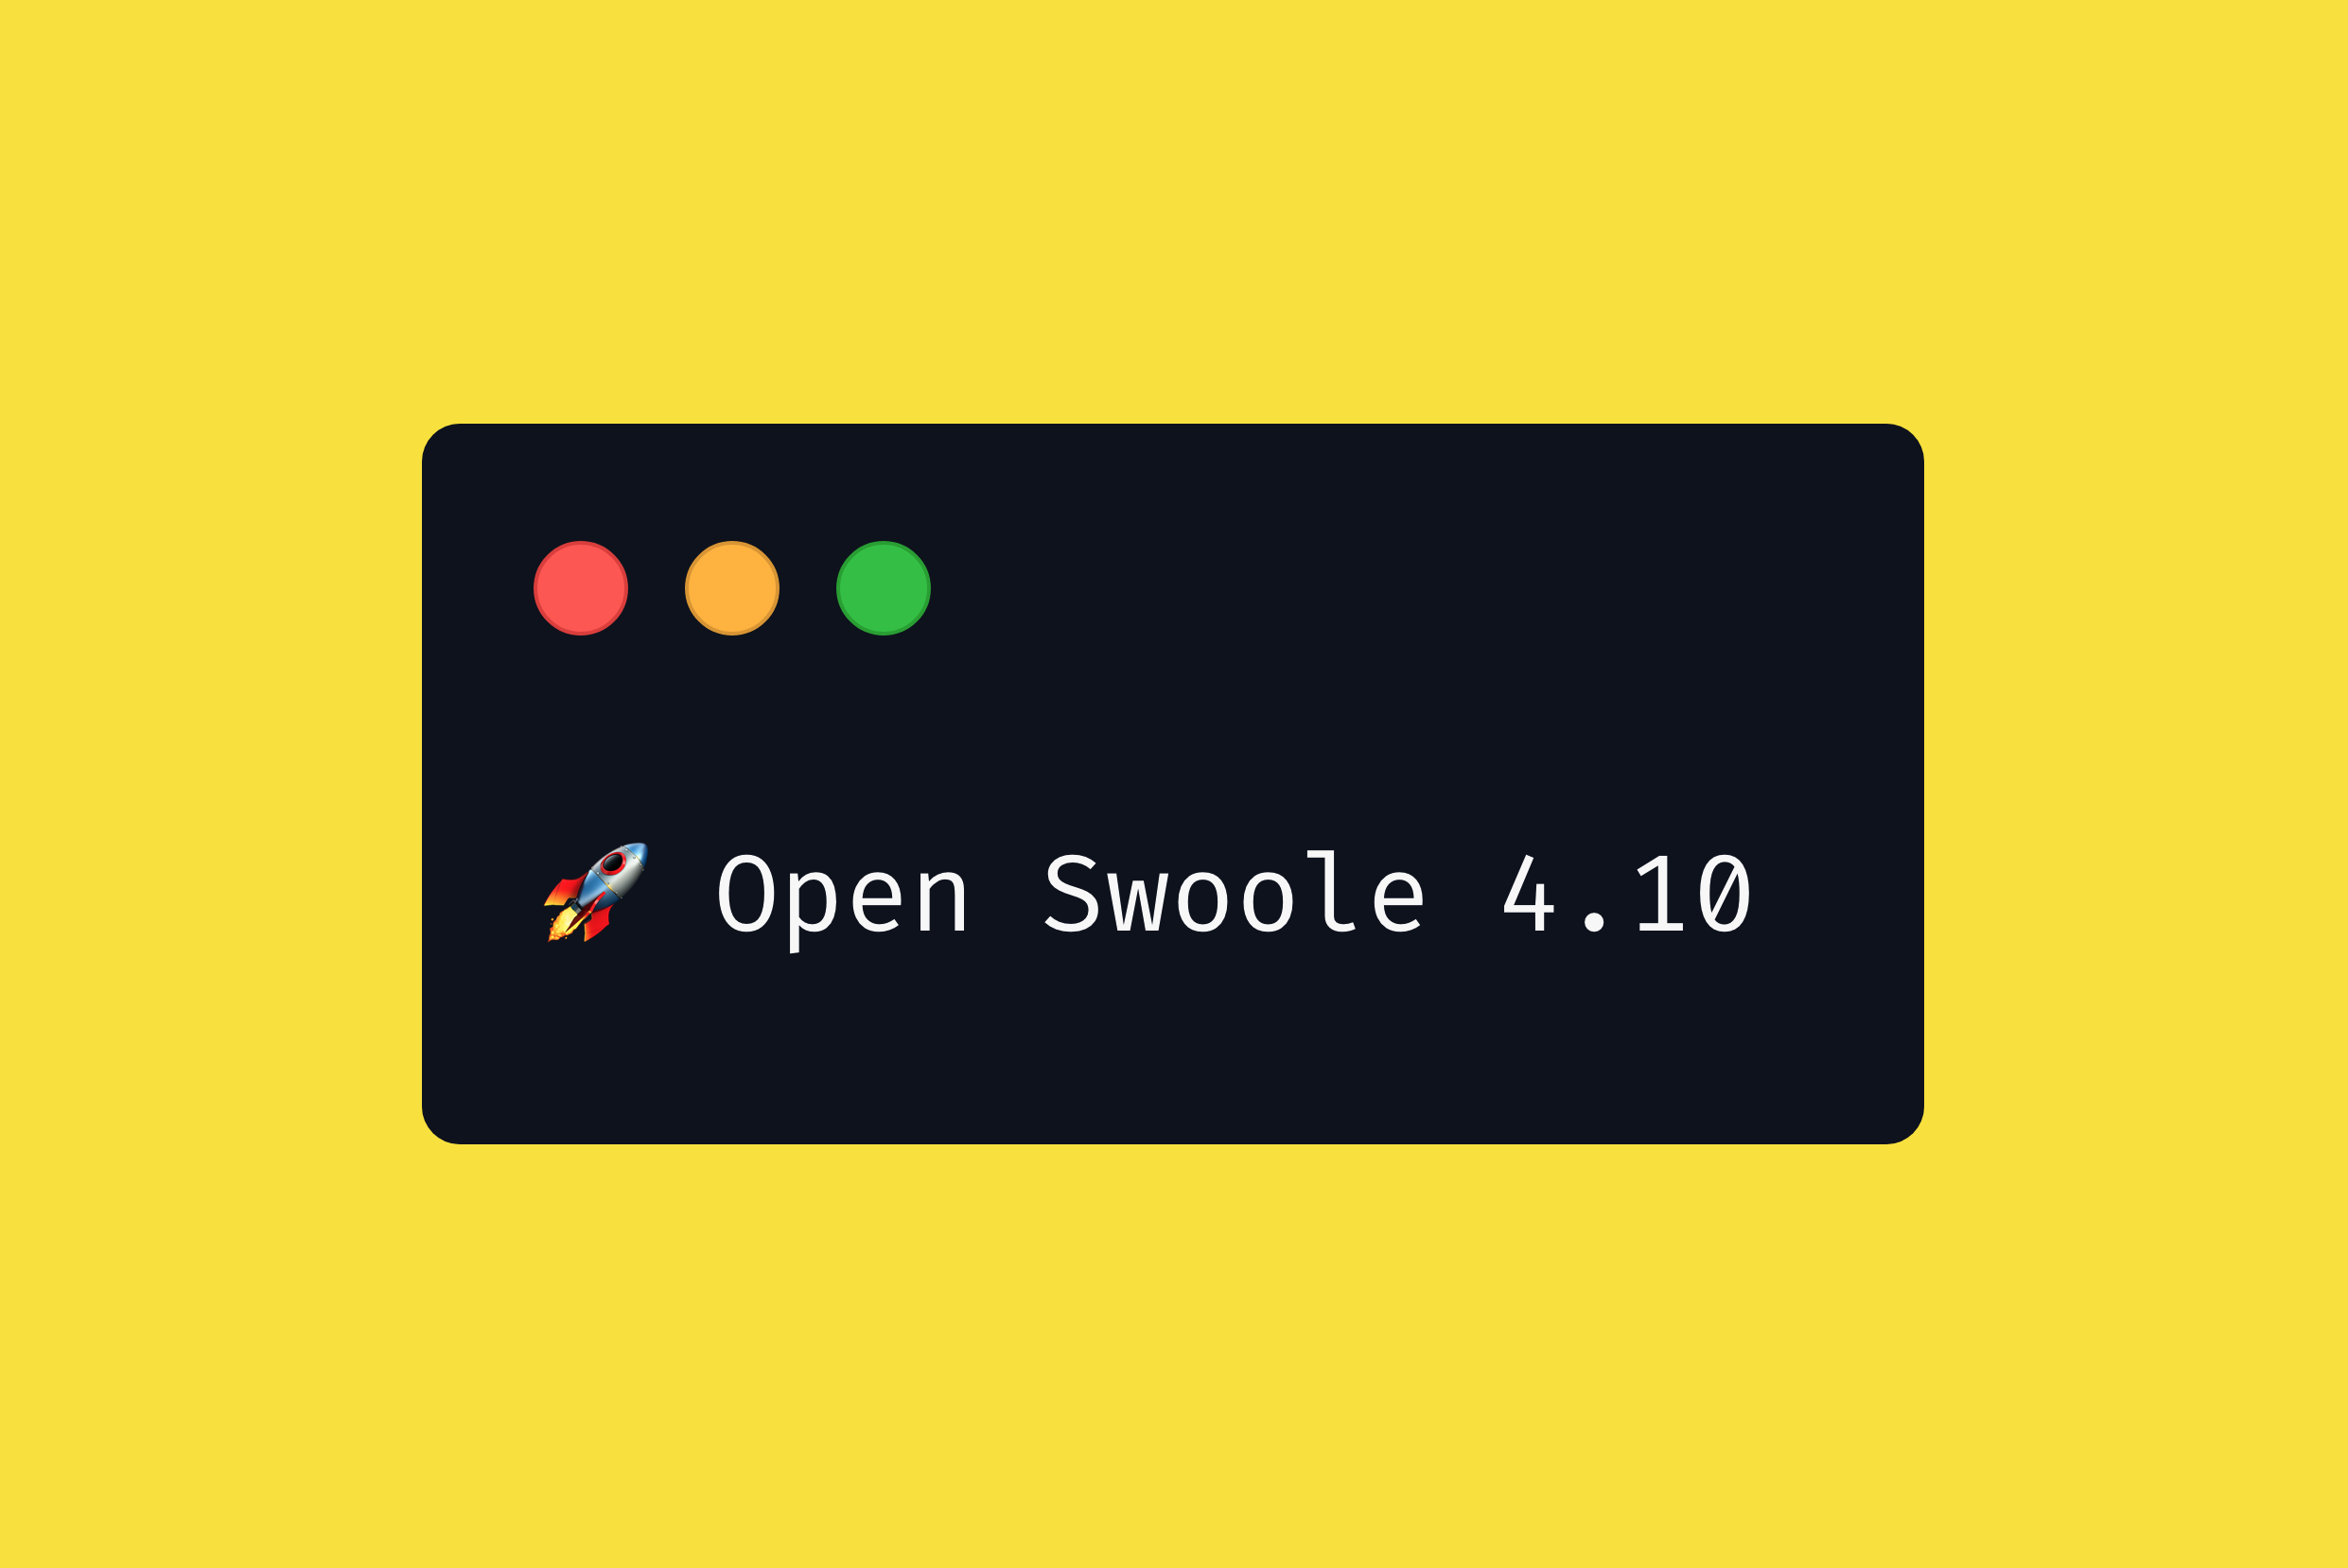 Open Swoole 4.10.0 released with coroutine selector, HTTP2 SSE streaming, sleep data type bug fixes and more